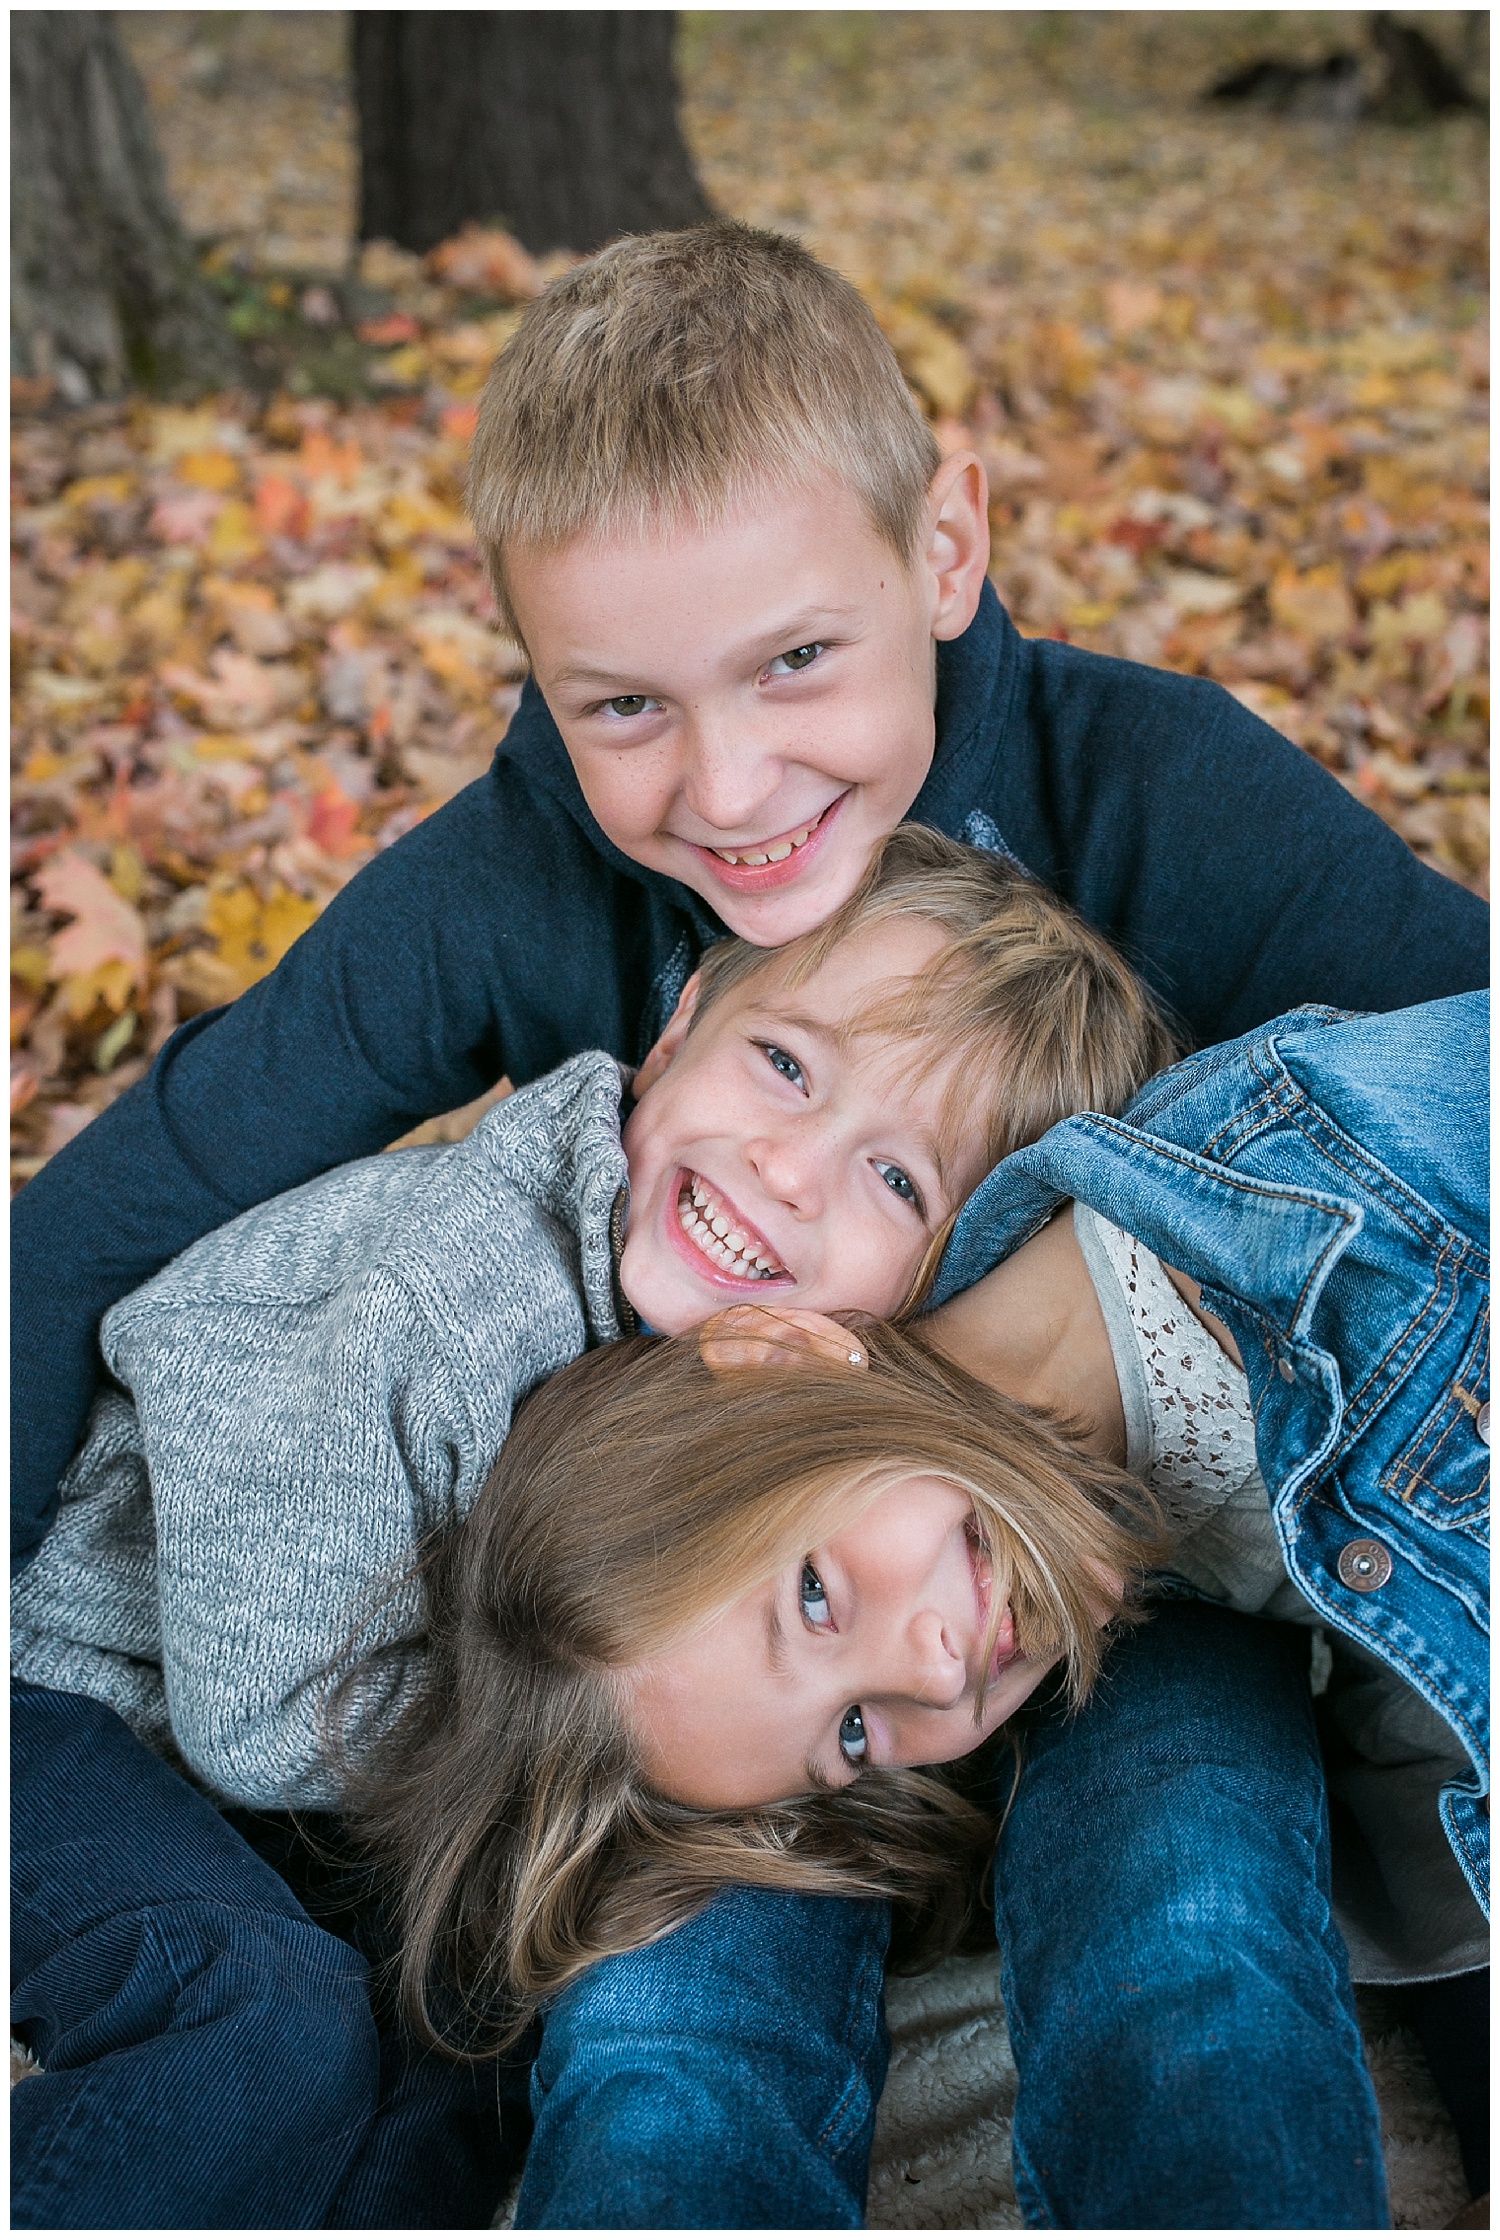 The Schurr family session at Letchworth state park - Whimsy roots photography 6.jpg